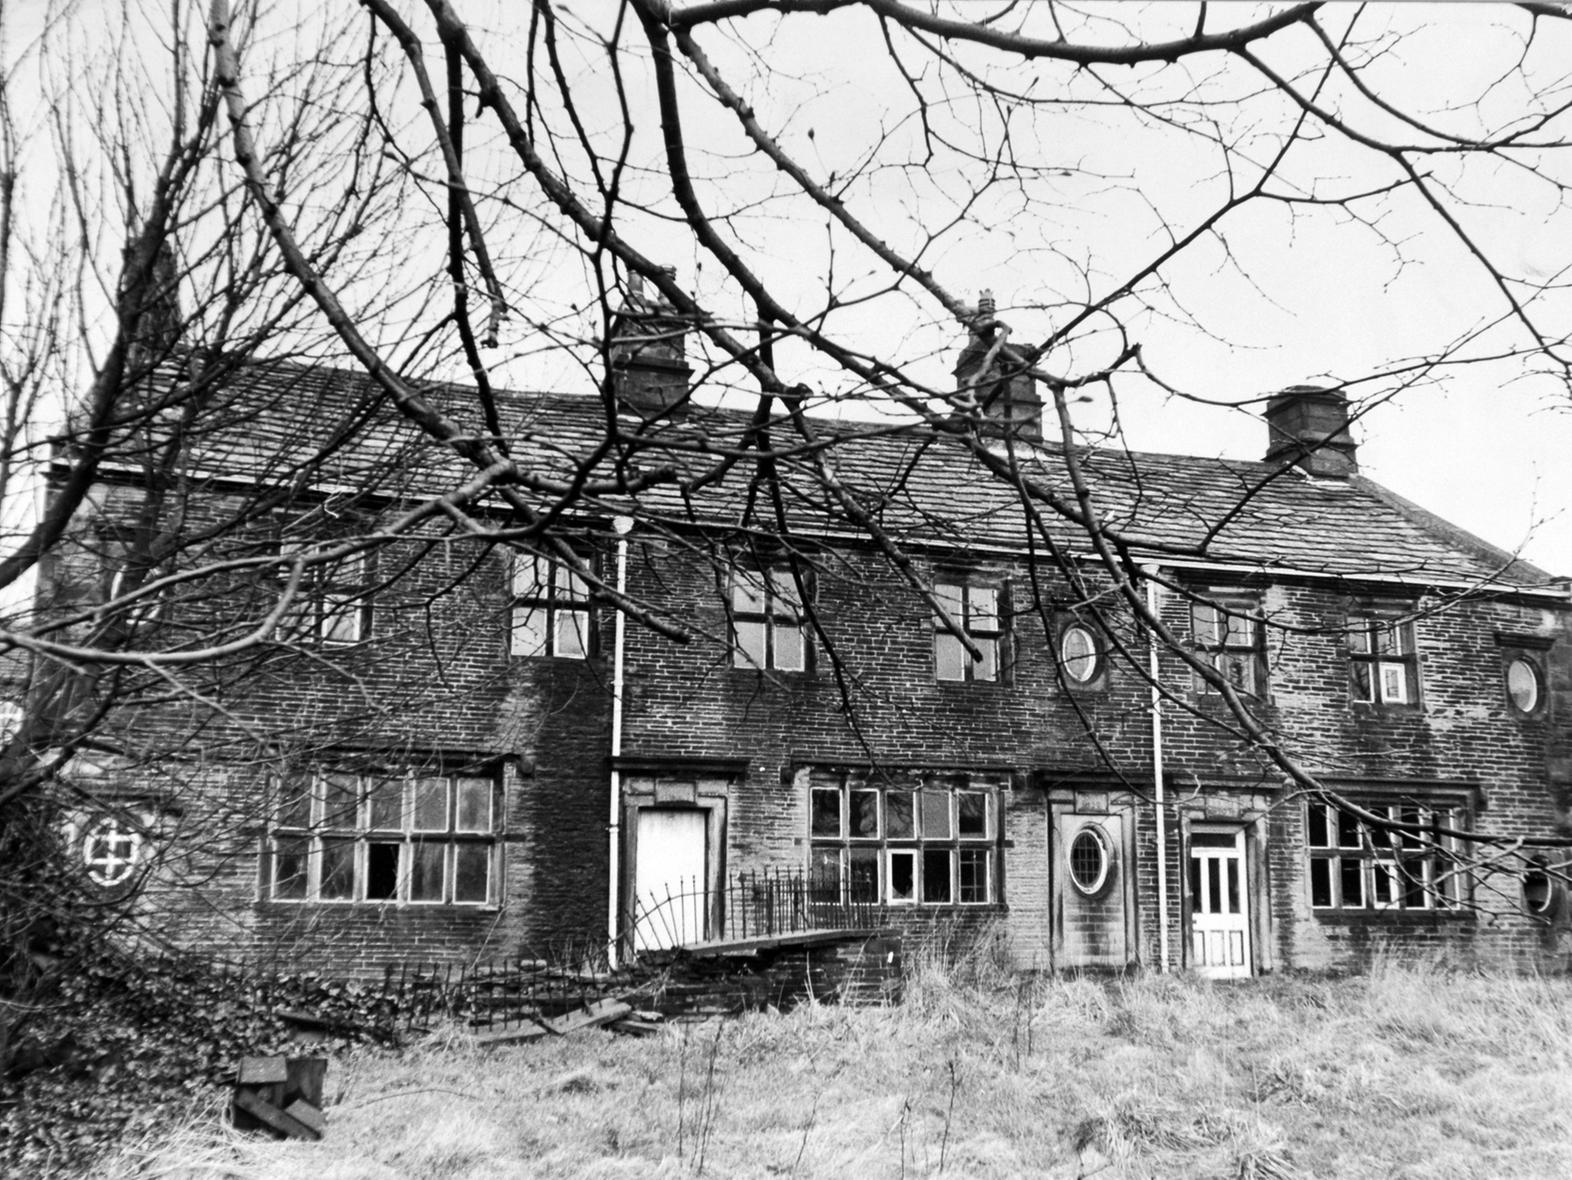 The Old Hall Farm at Woodhall Hills, Pudsey, which was tipped to become a golf clubhouse.